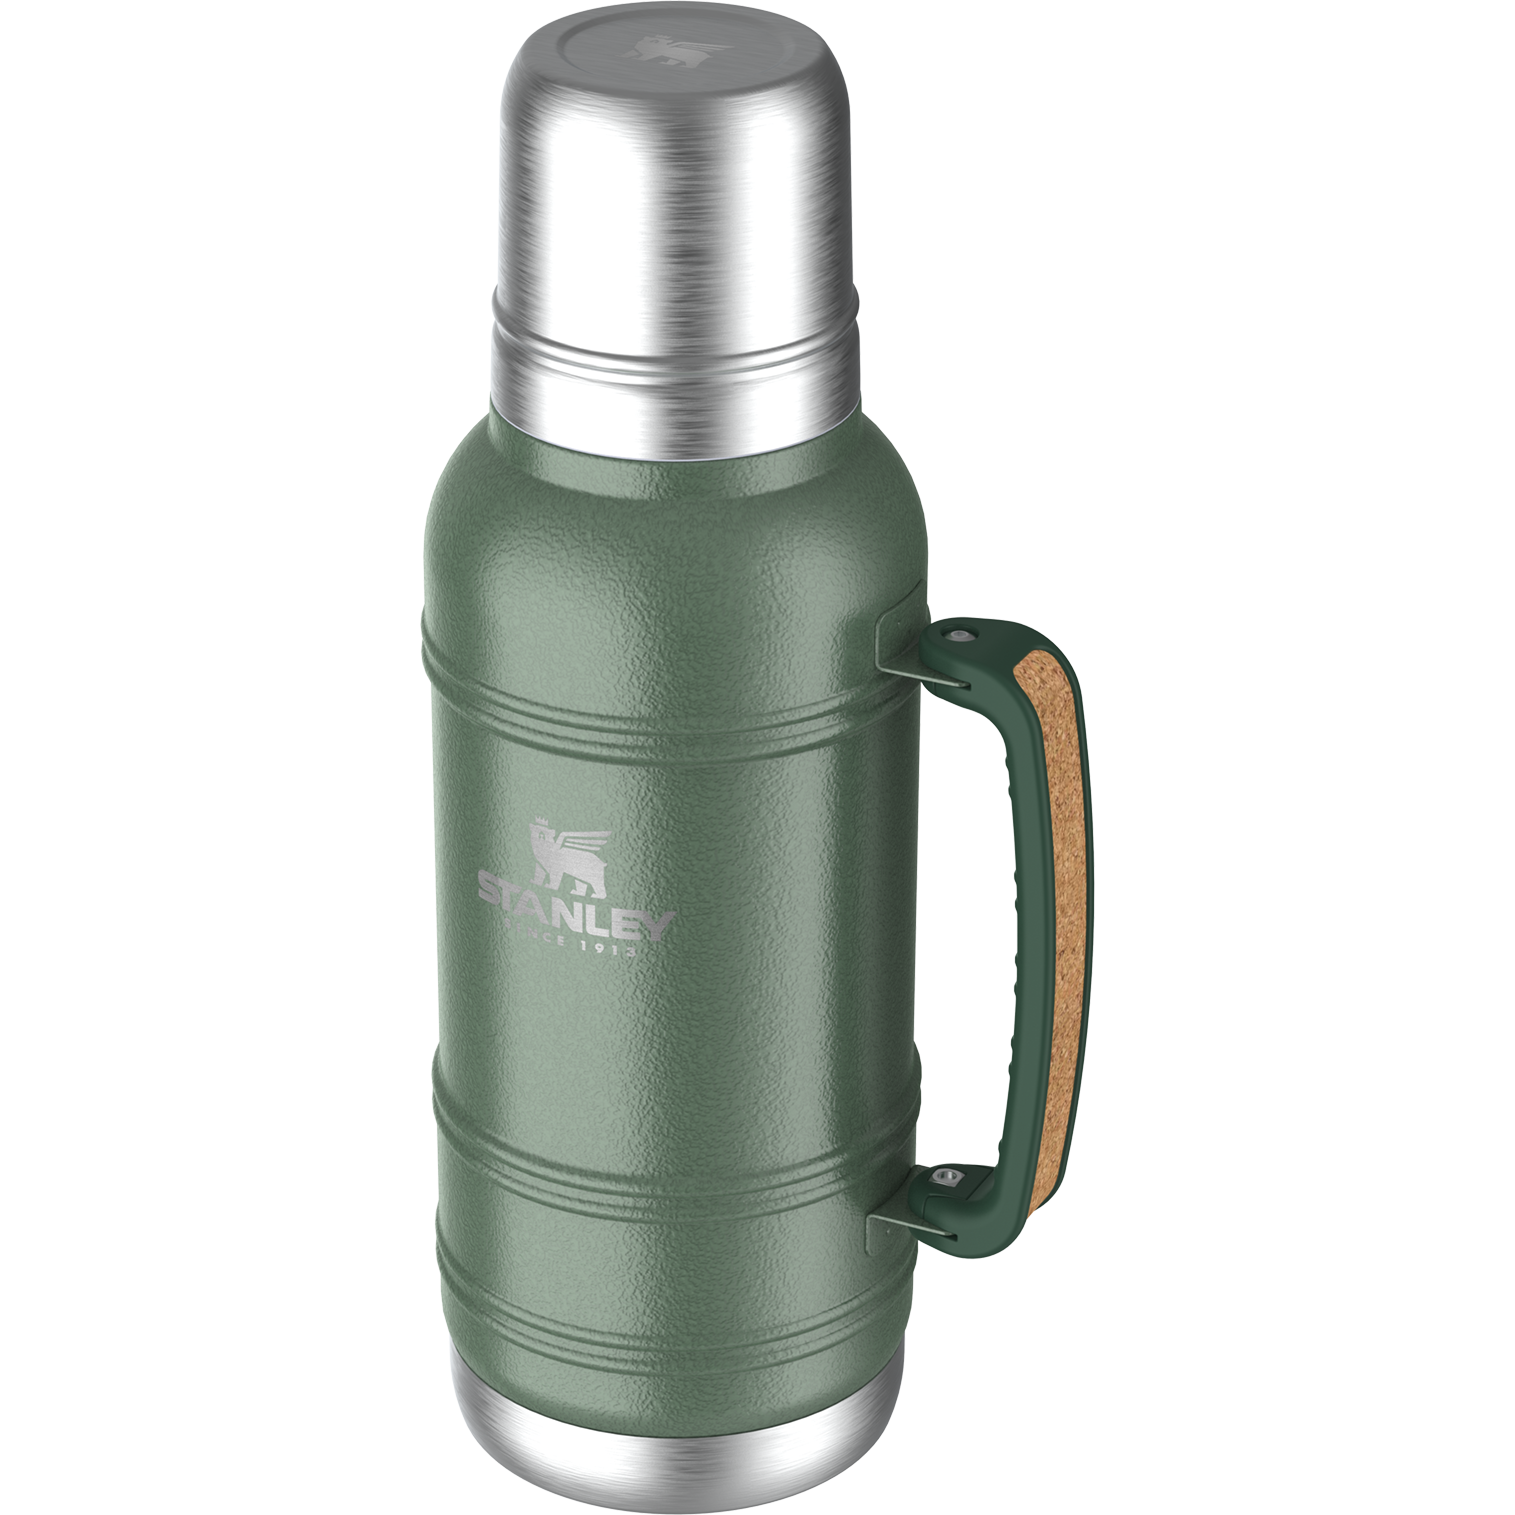 Stanley The Artisan Thermoflasche | 1.4L